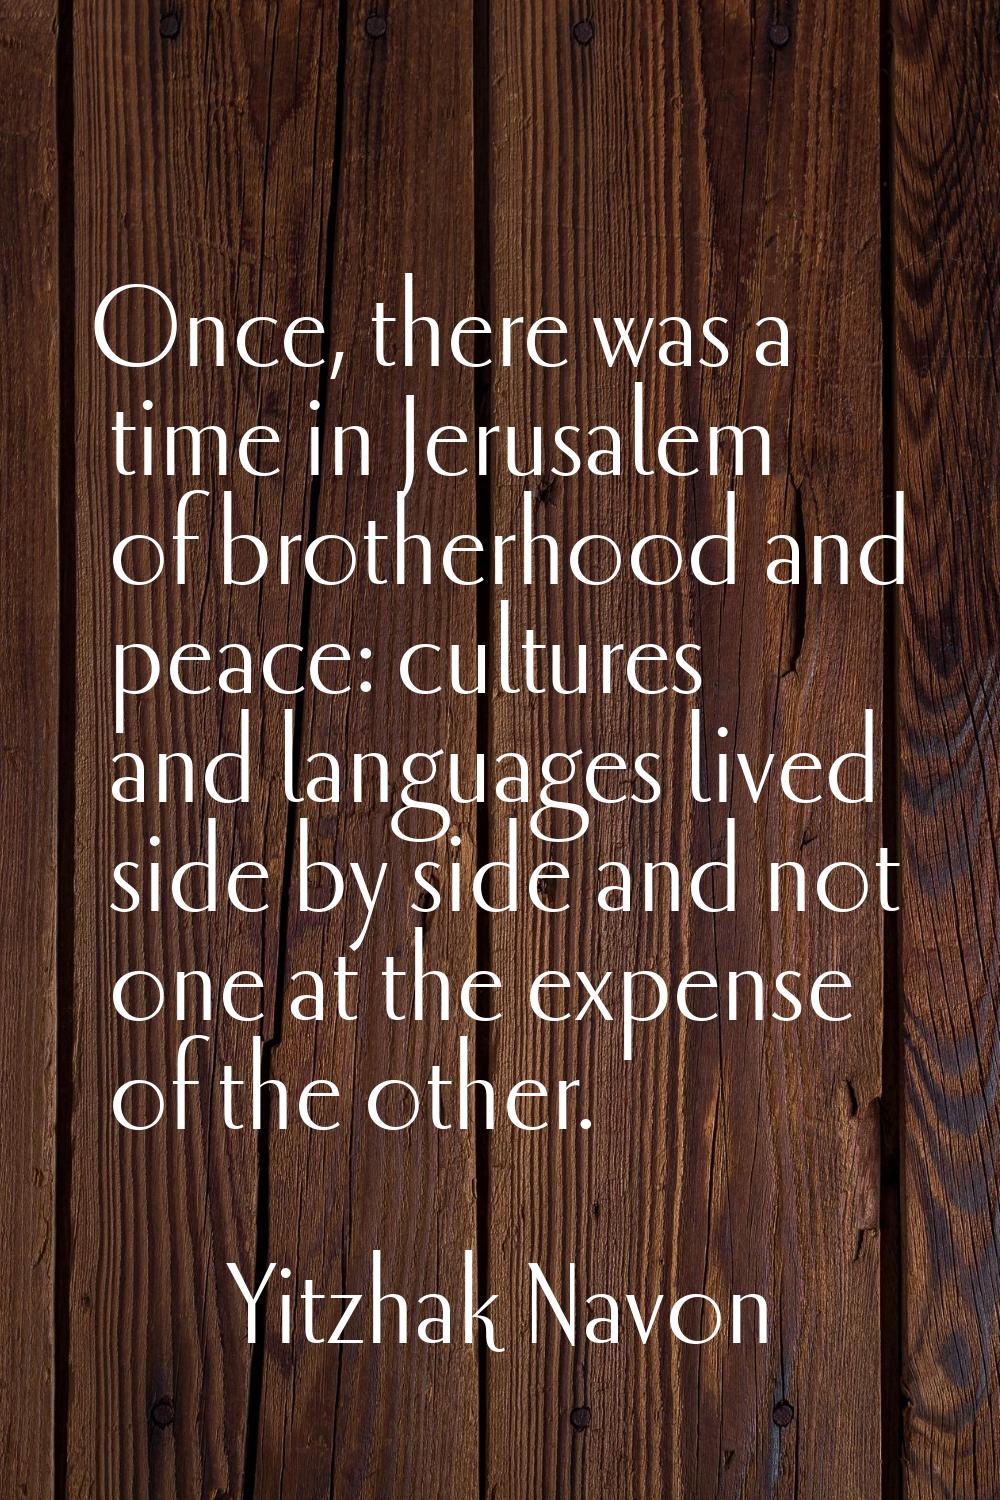 Once, there was a time in Jerusalem of brotherhood and peace: cultures and languages lived side by 